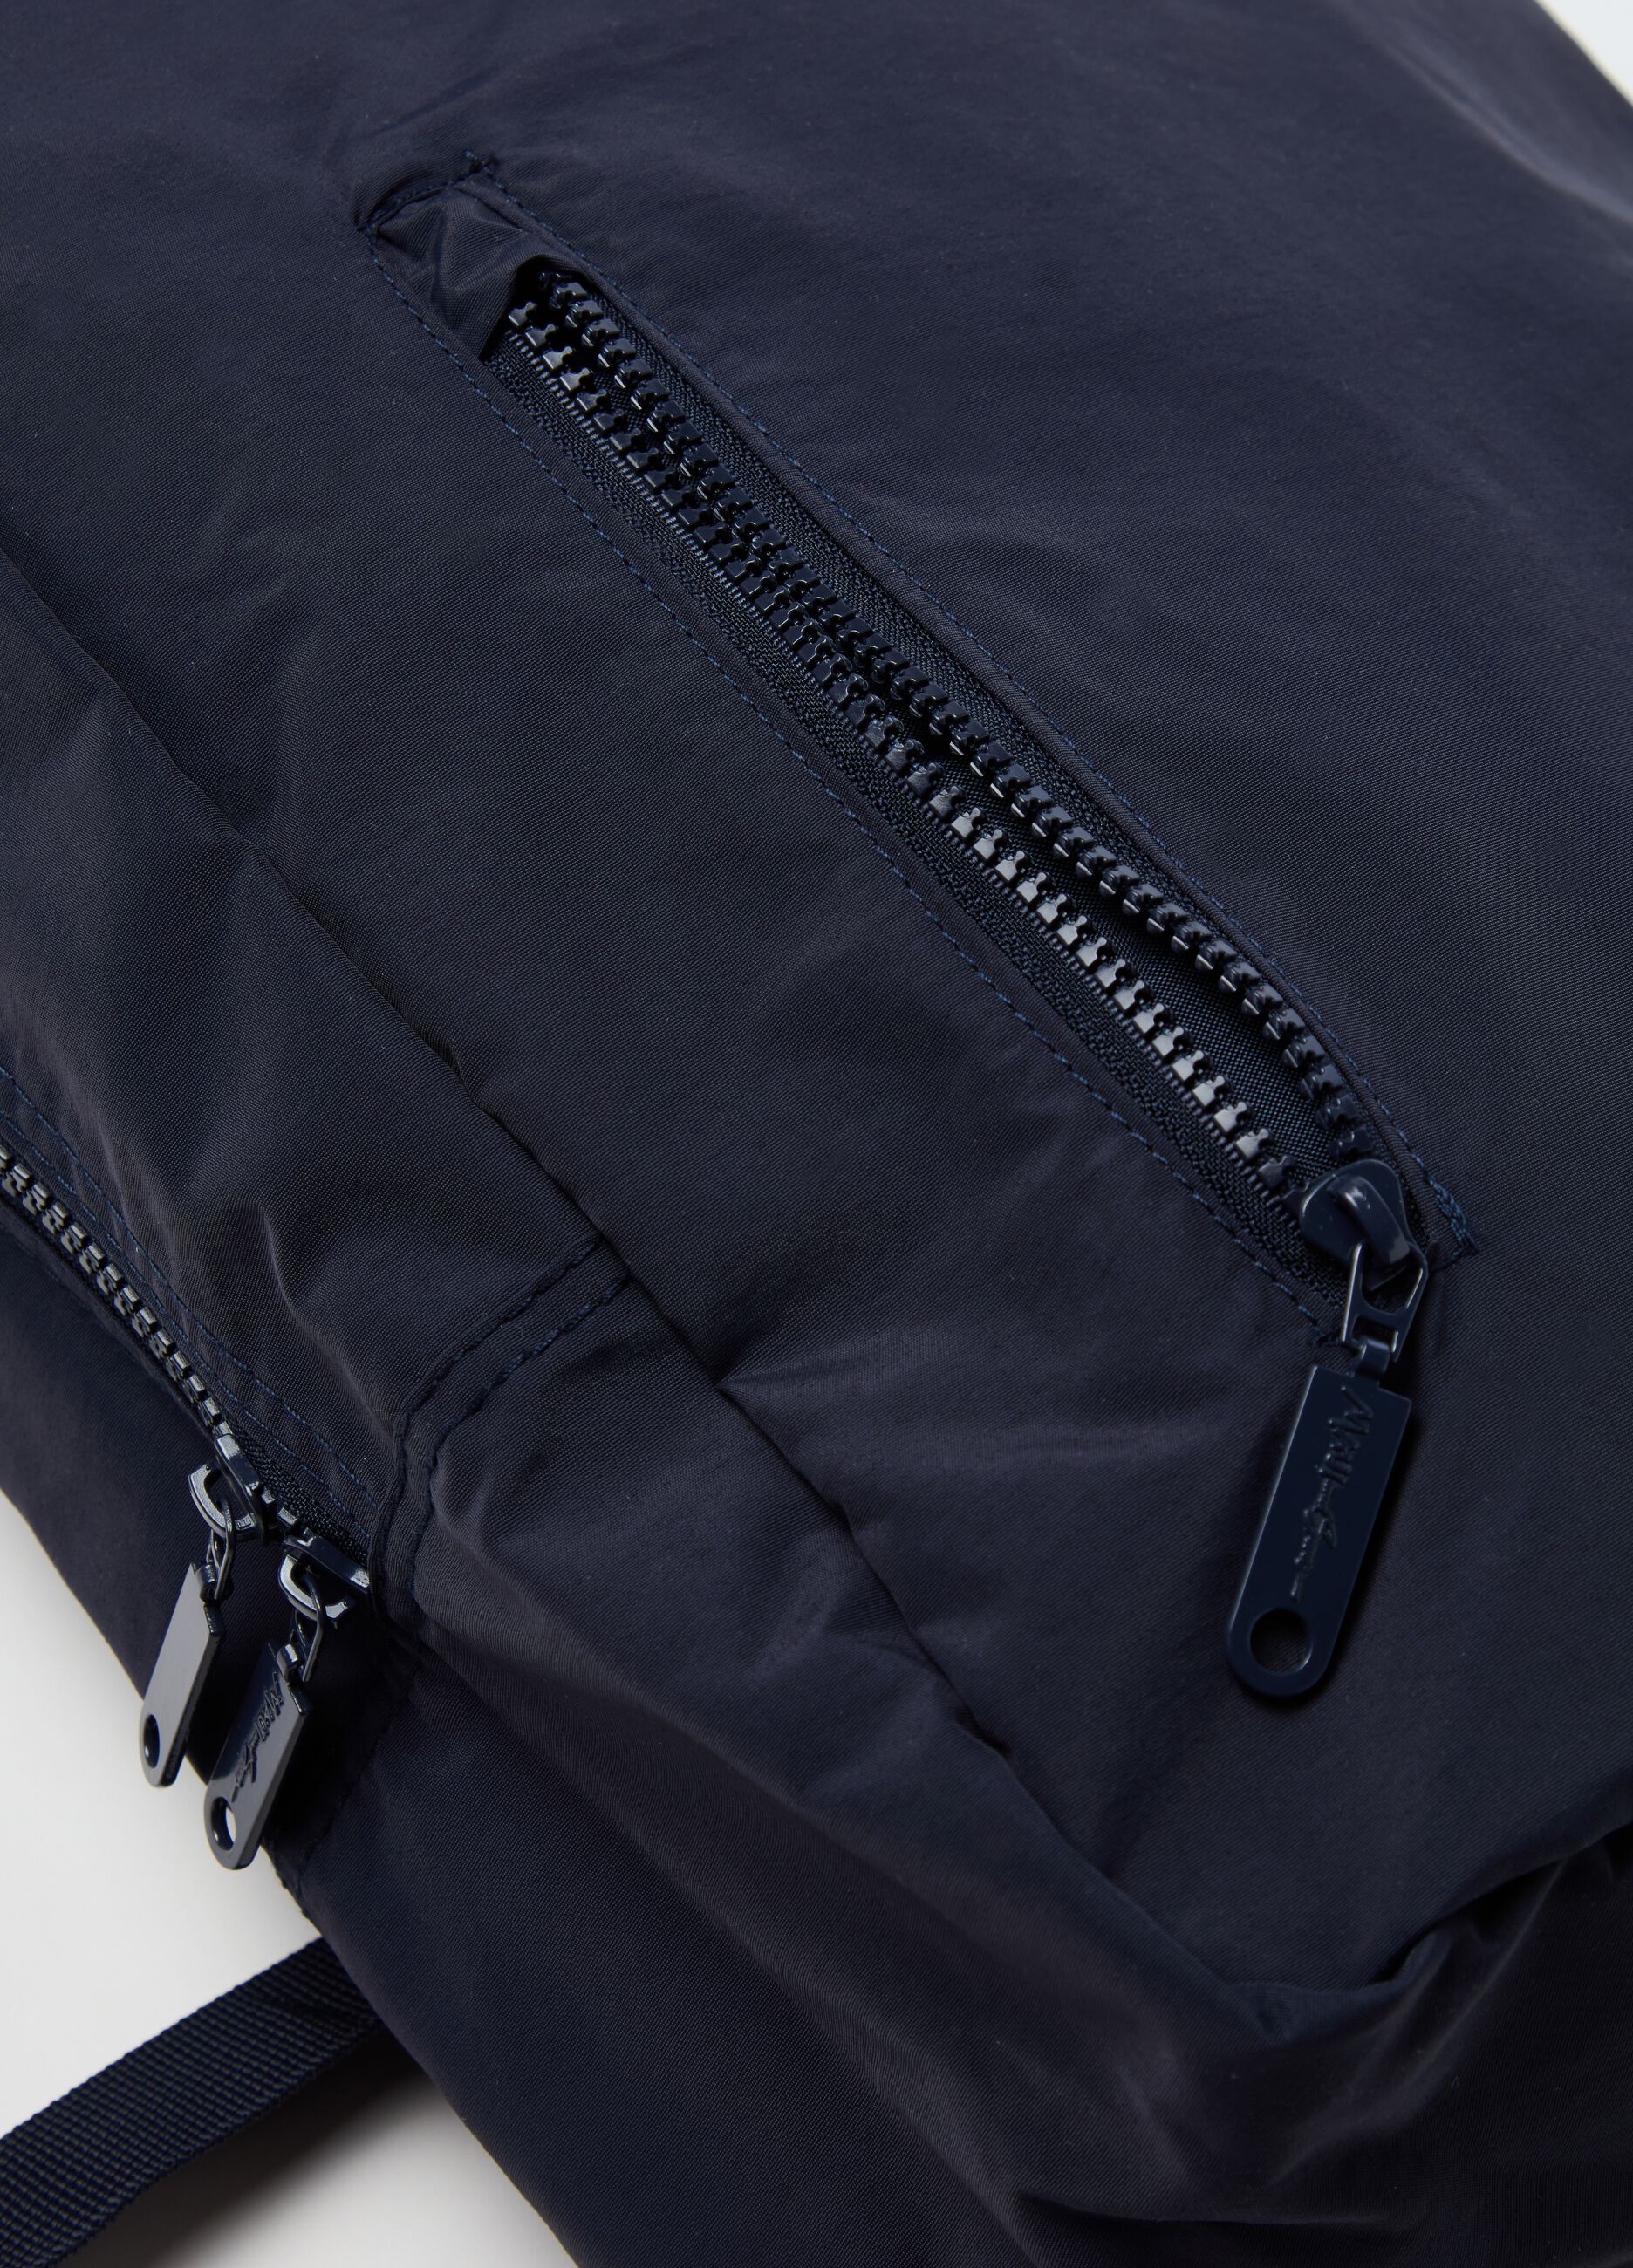 Oval backpack with outside pocket